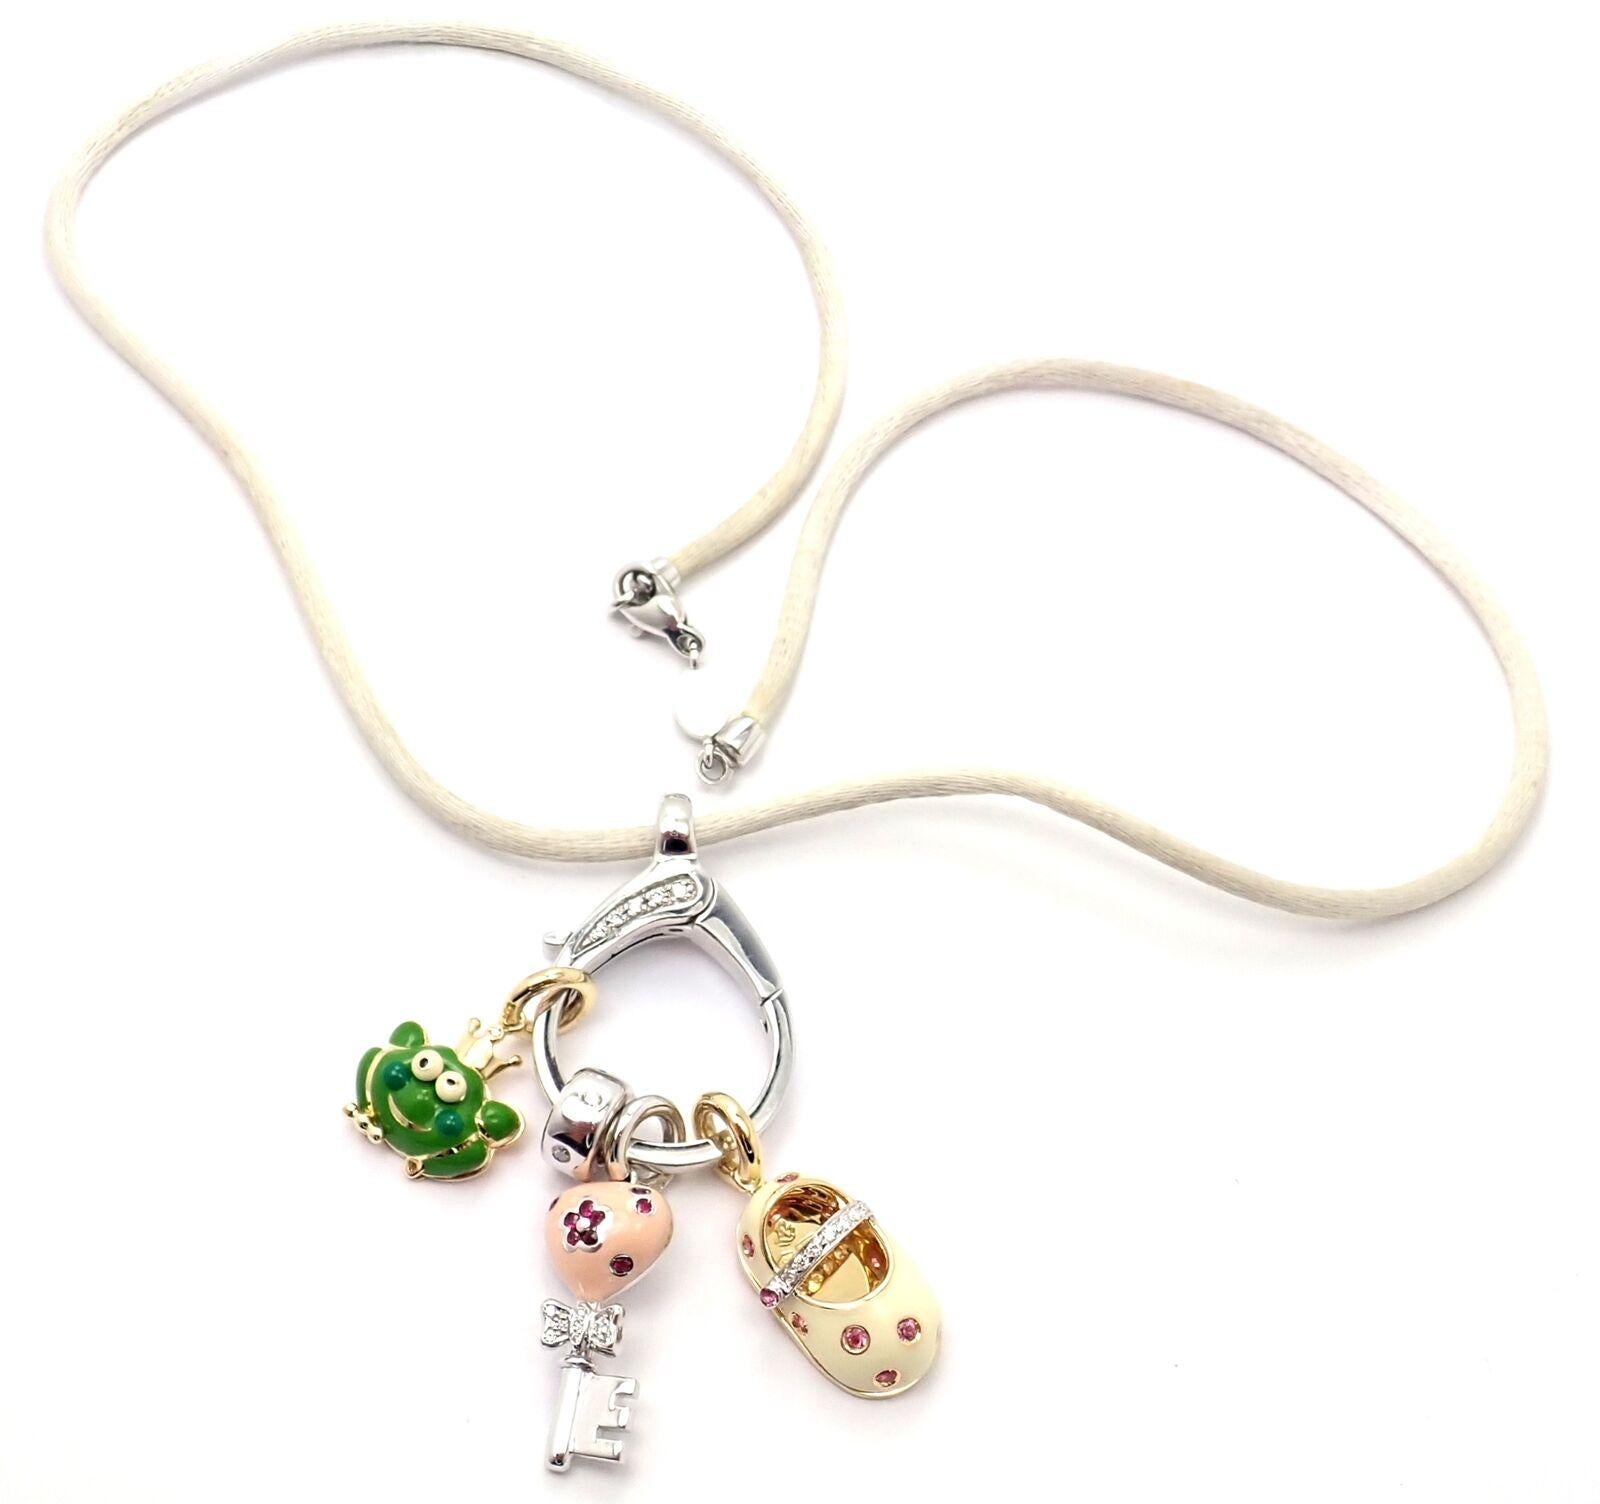 18k White Gold Diamond Oval Pendant Enhancer on A Silk Cord With 3 Charms and 1 Spacer by Aaron Basha. 
With 1. Baby Shoe
2. Frog
3. Key
Round brilliant cut diamonds VS1 clarity, G color total weight approx. .25ct
Details: 
Length: White Silk Cord: